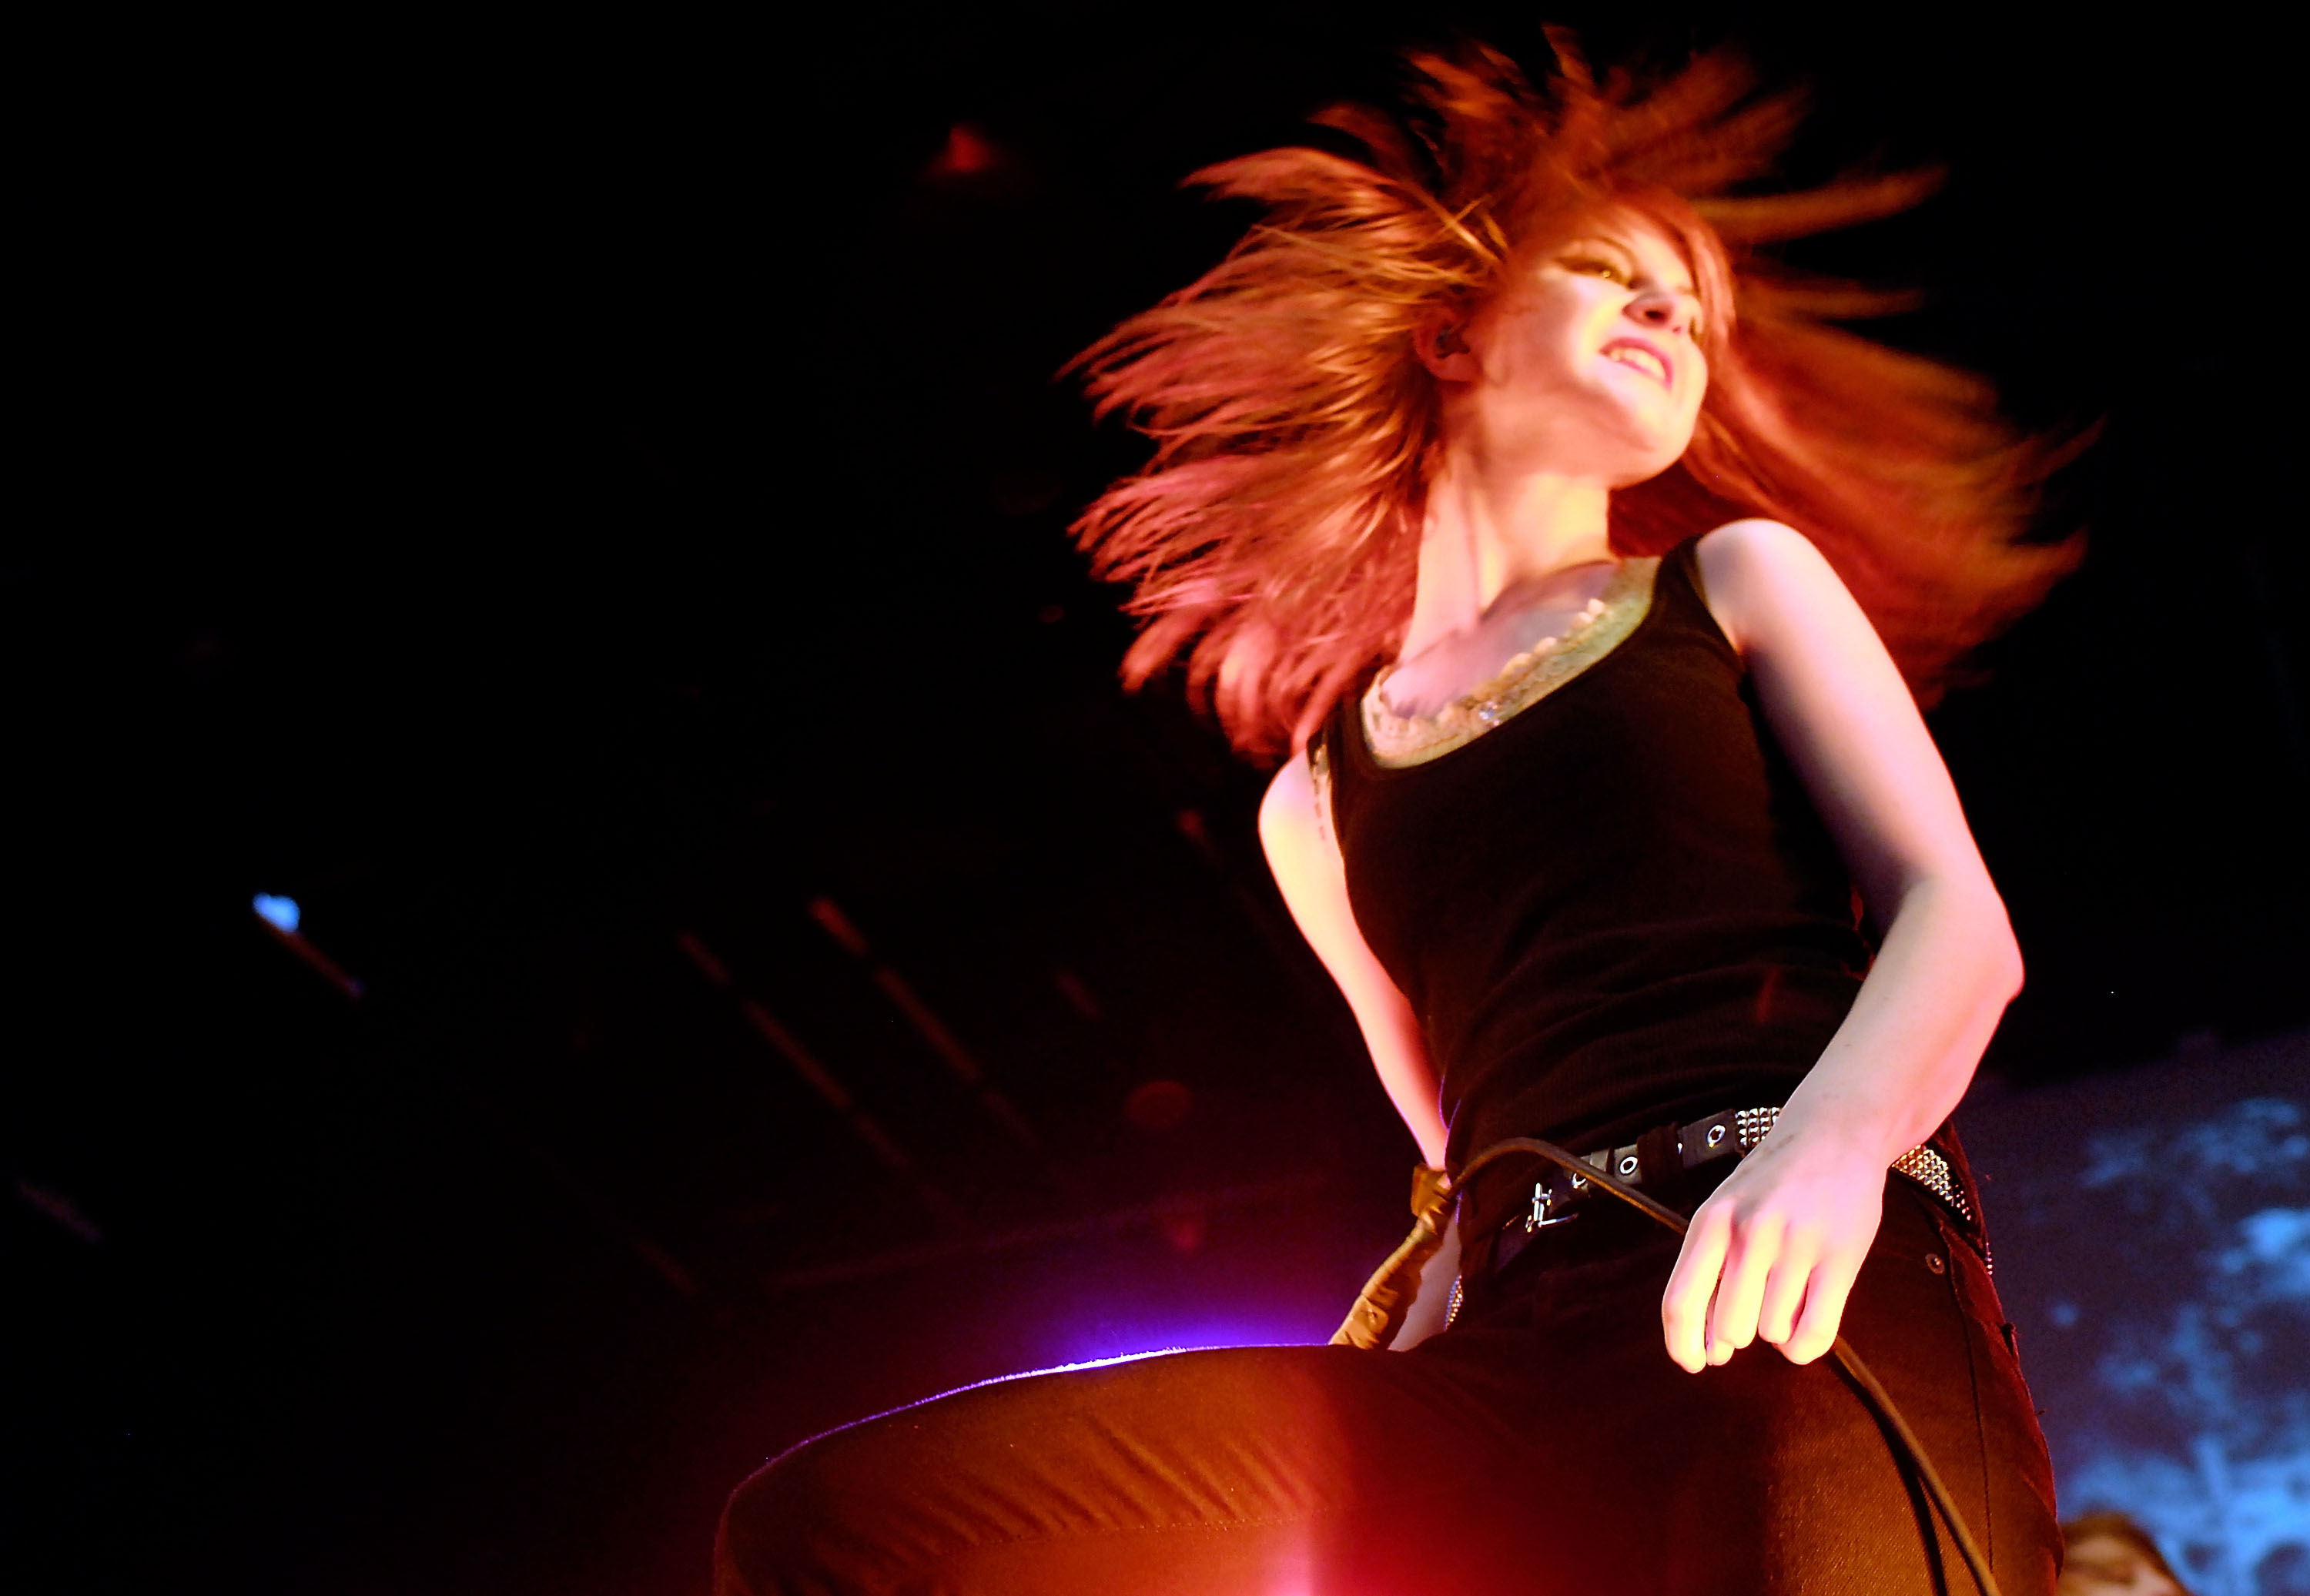 Wallpaper  Hayley Williams guitarist singing Paramore entertainment  stage 1920x1080 px musical theatre performance art rock concert  performing arts 1920x1080  goodfon  600054  HD Wallpapers  WallHere